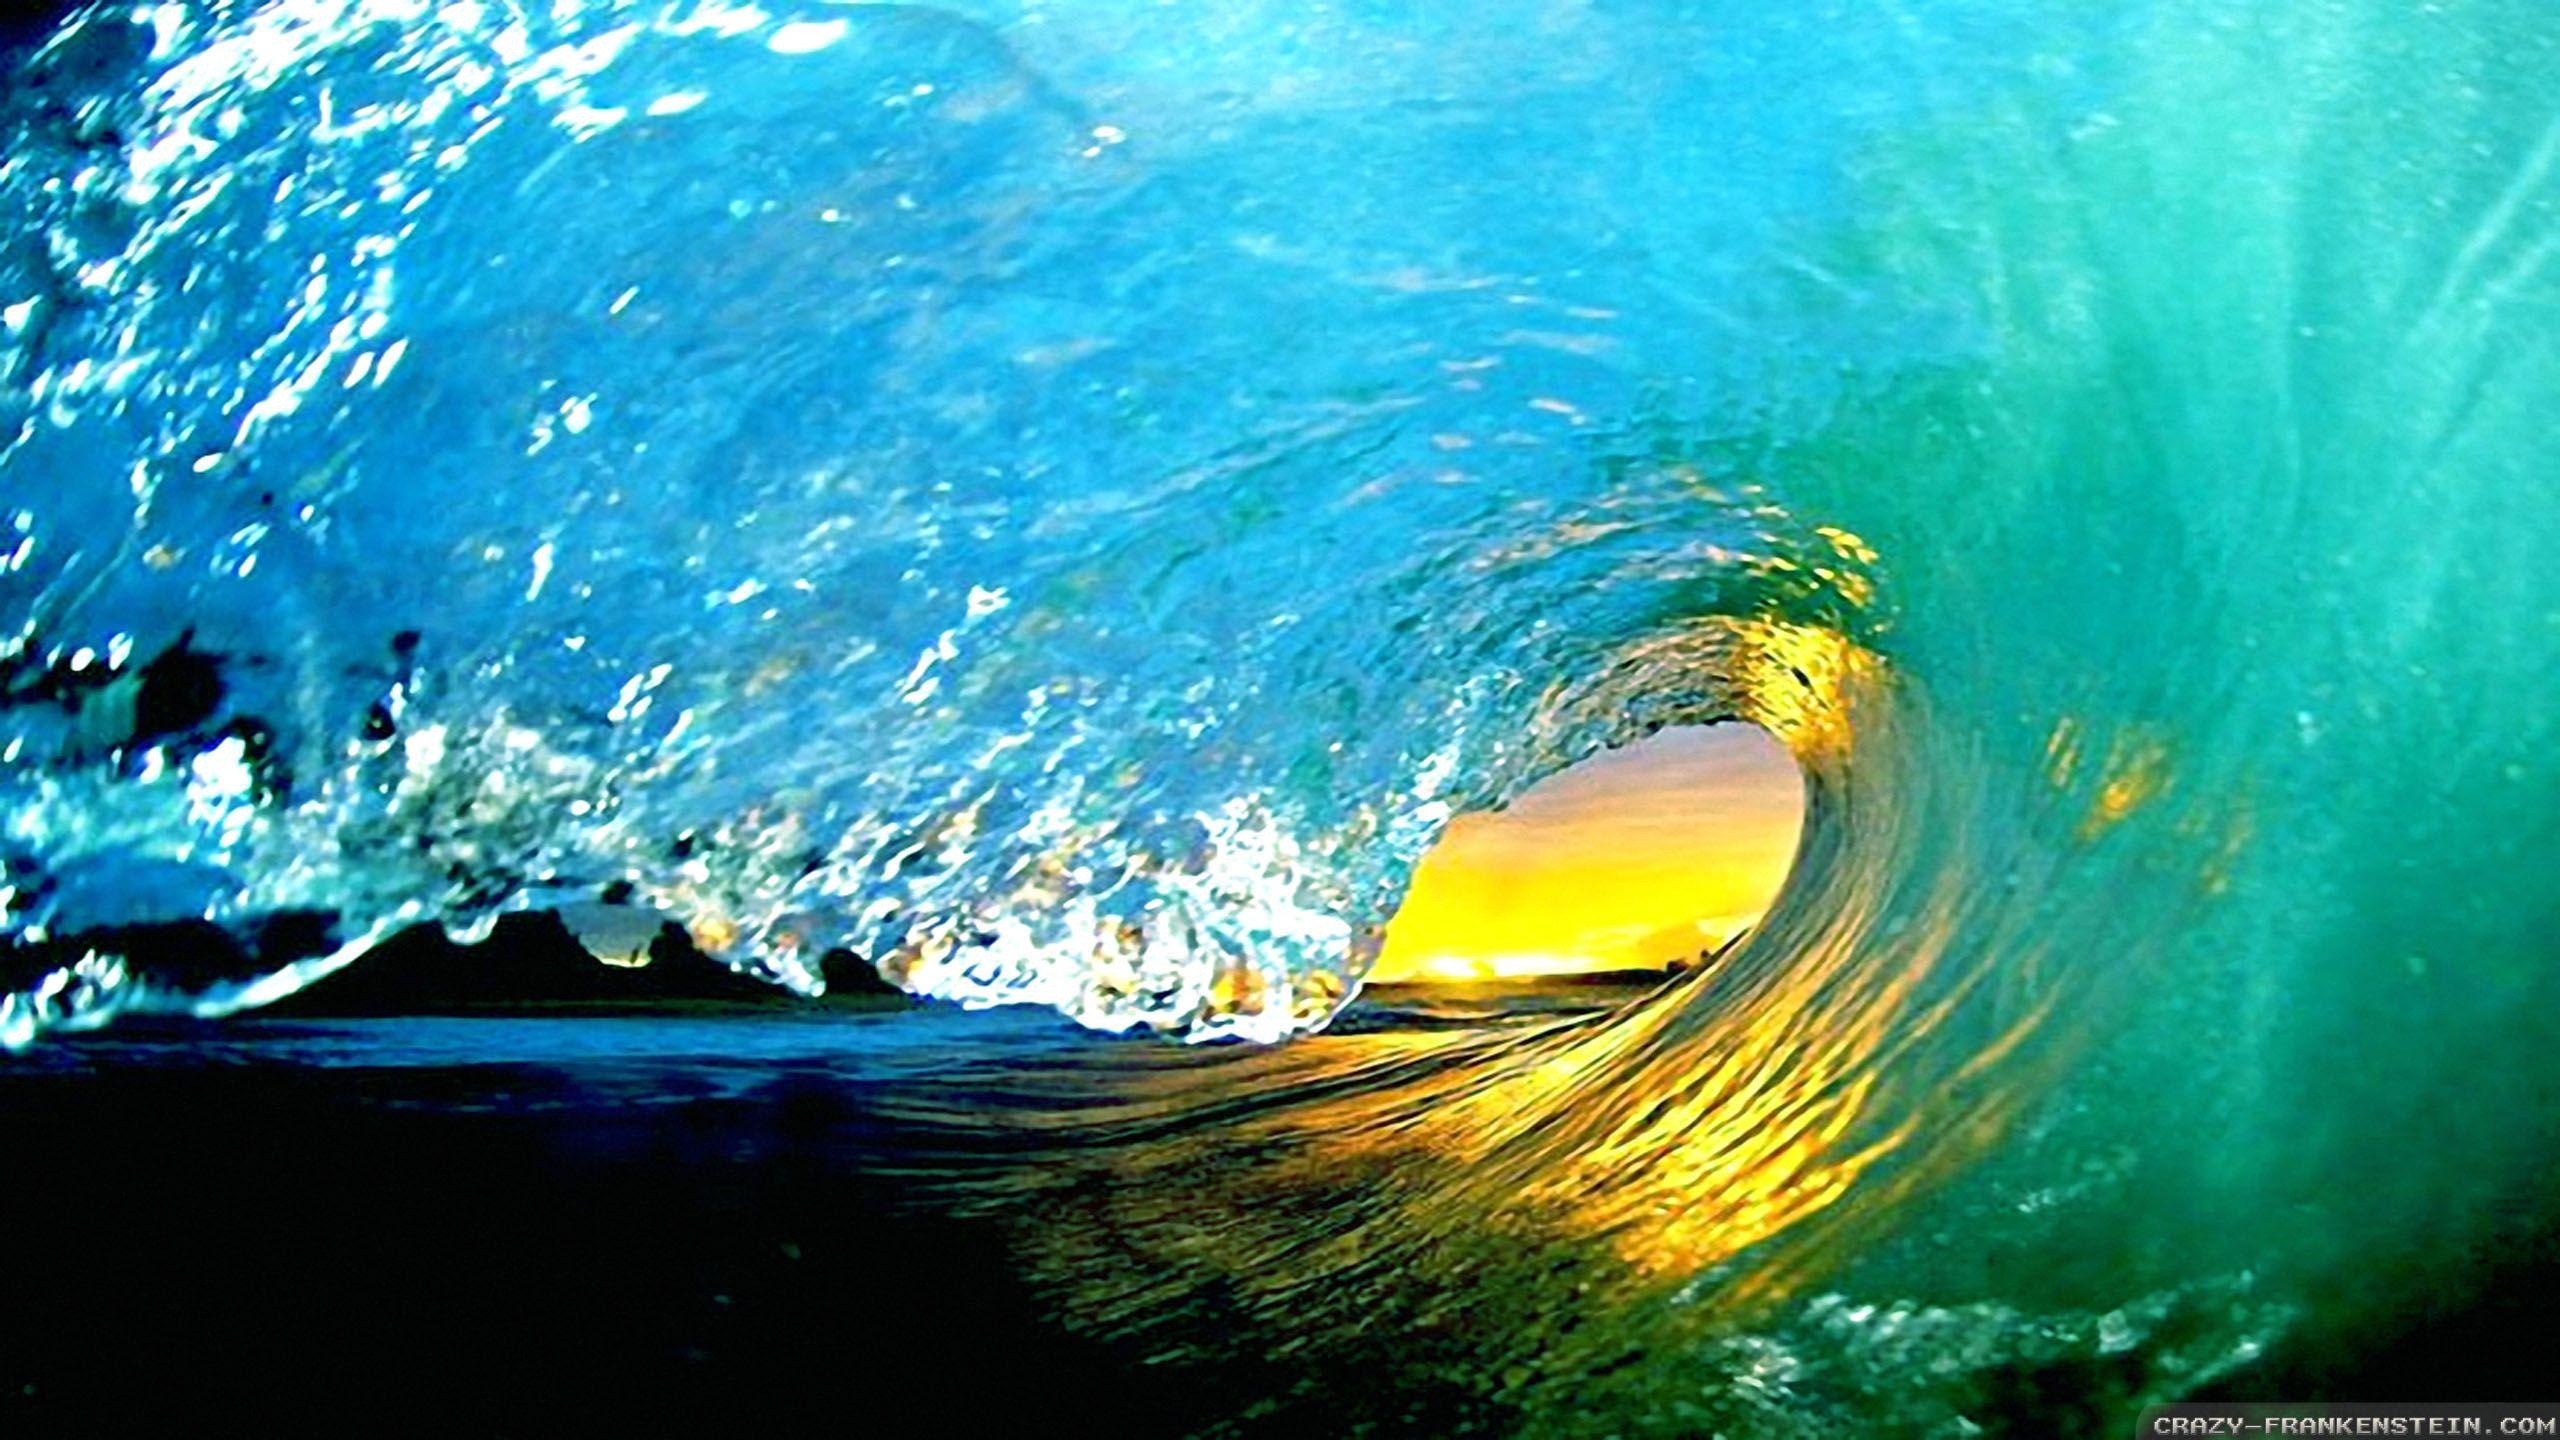 Wave Wallpapers Wallpaper Cave